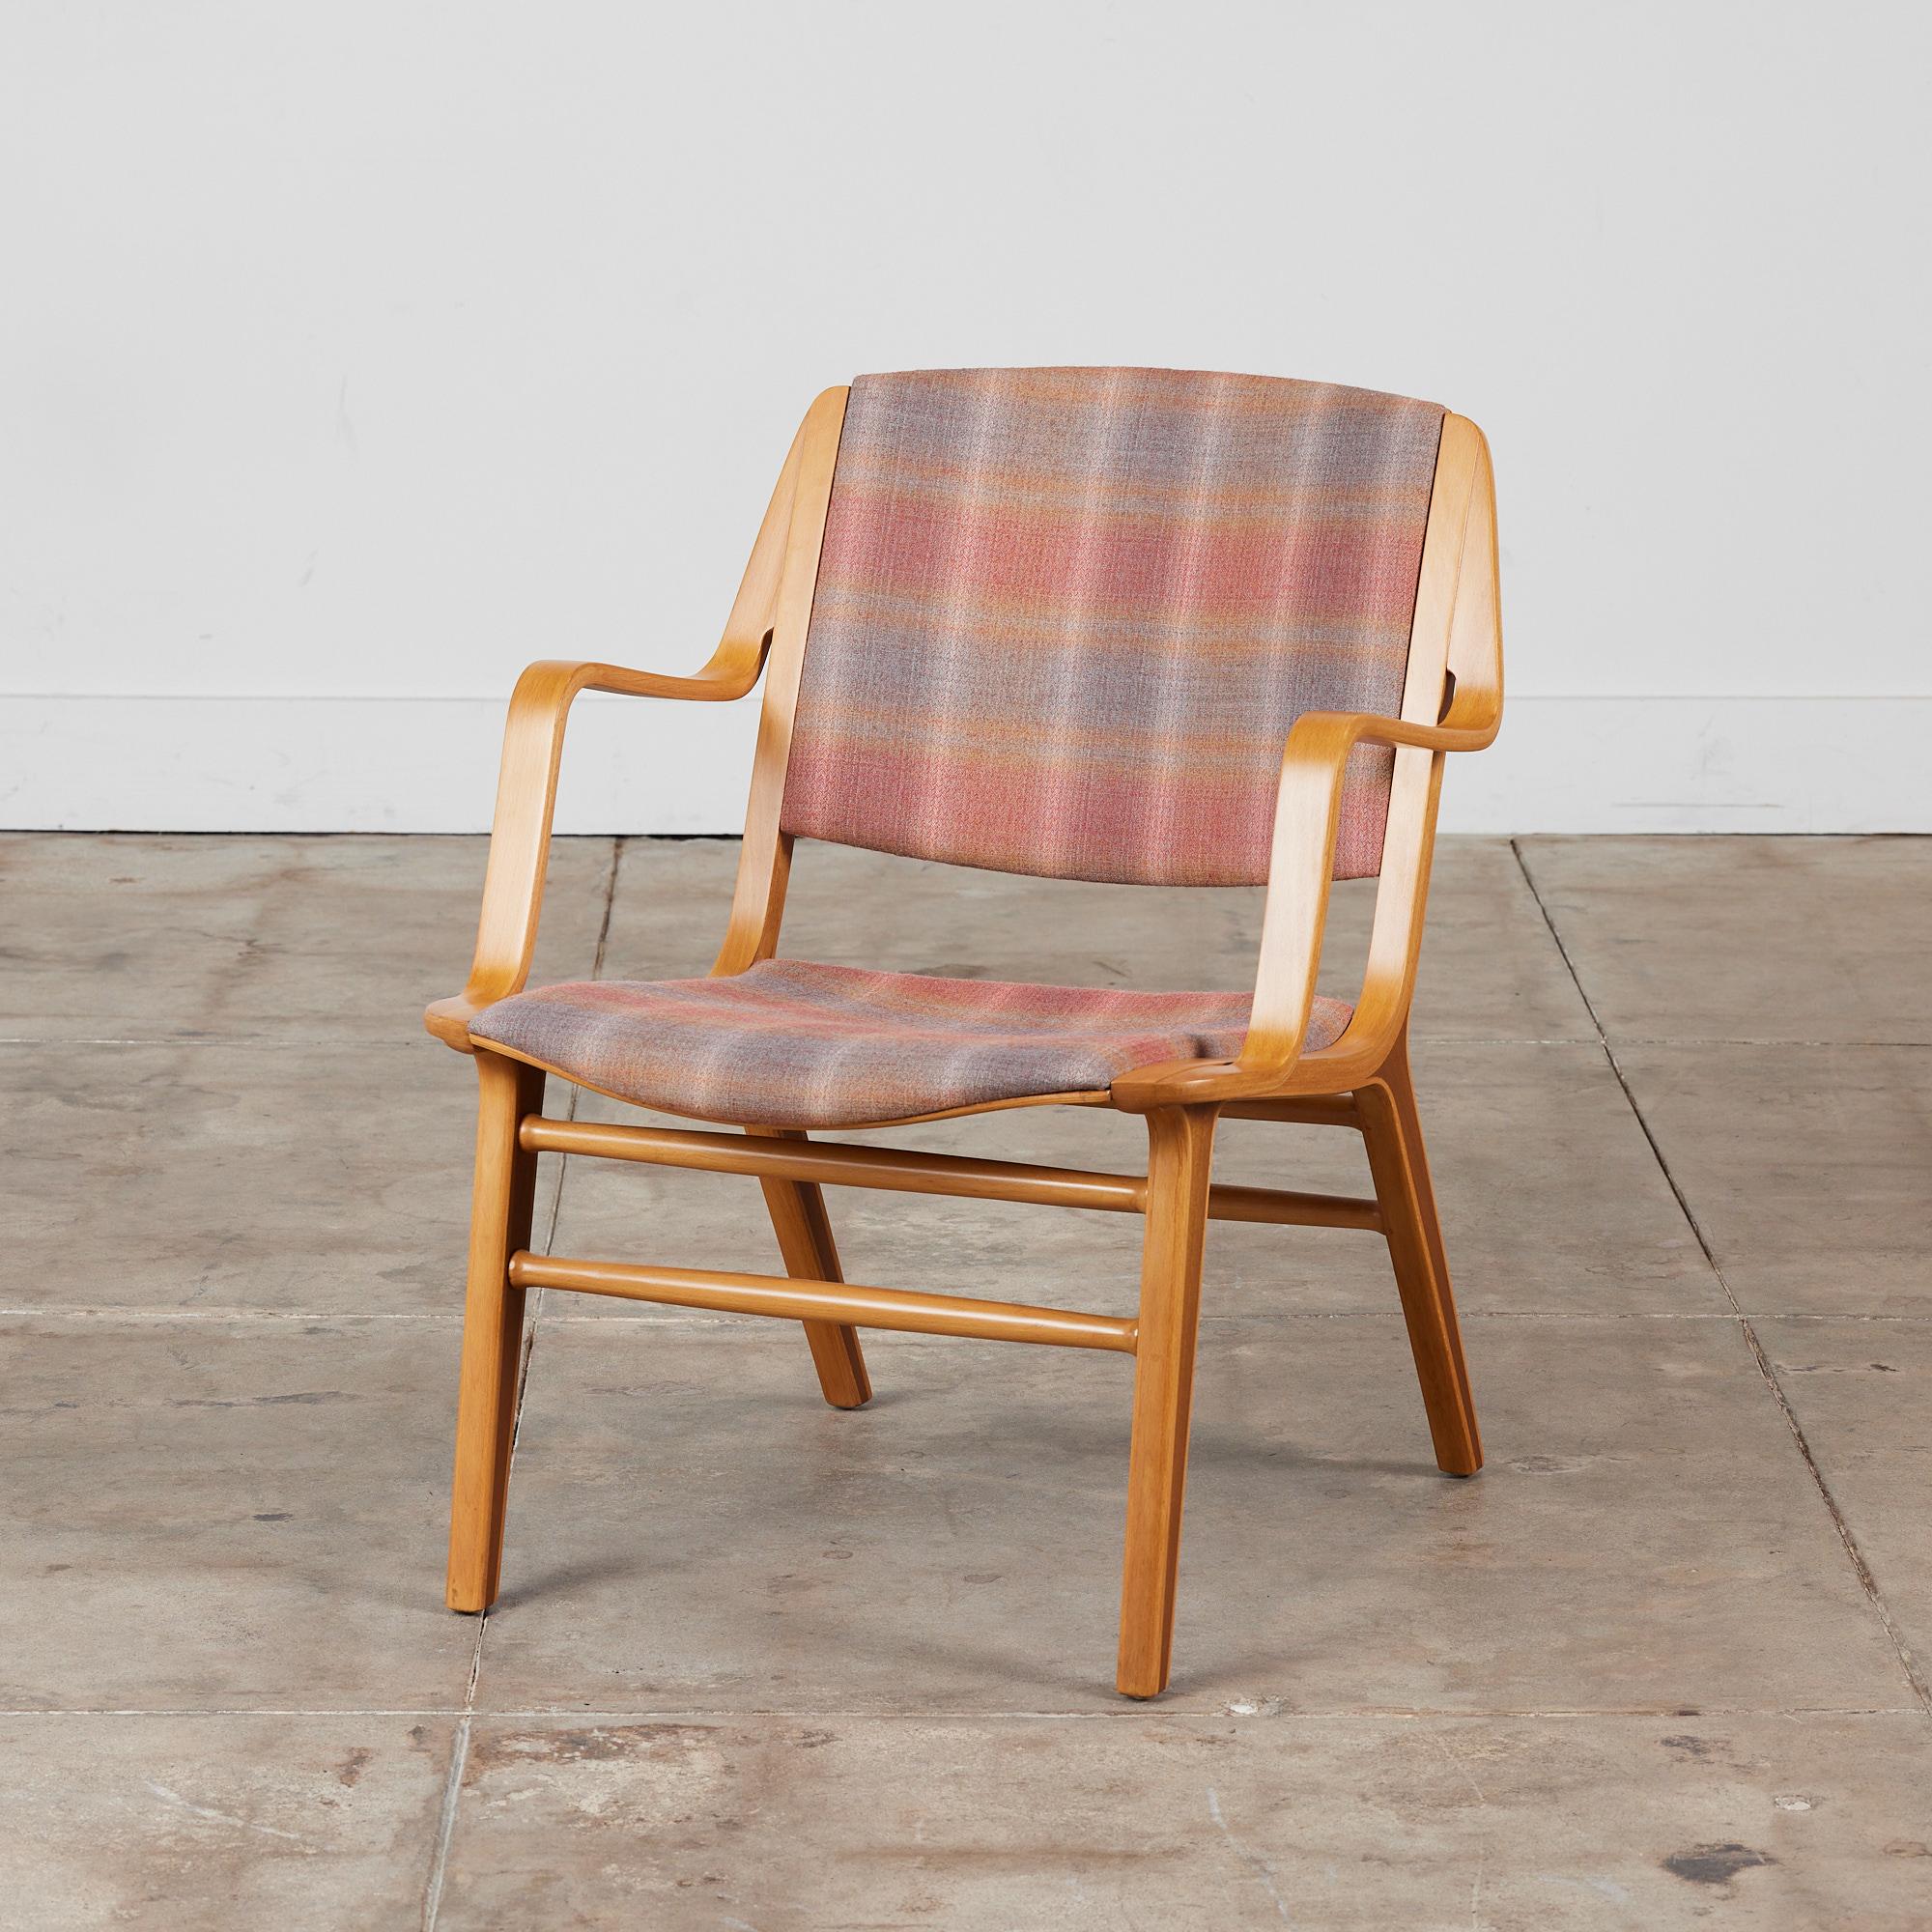 Originally designed in 1947 by Peter Hvidt & Orla Mølgaard Nielsen for Fritz Hansen, Denmark. This chair, made in the 1960s, features a bent beechwood frame with curved armrests. The legs have a stunning exposed teak detailing on their sculpted